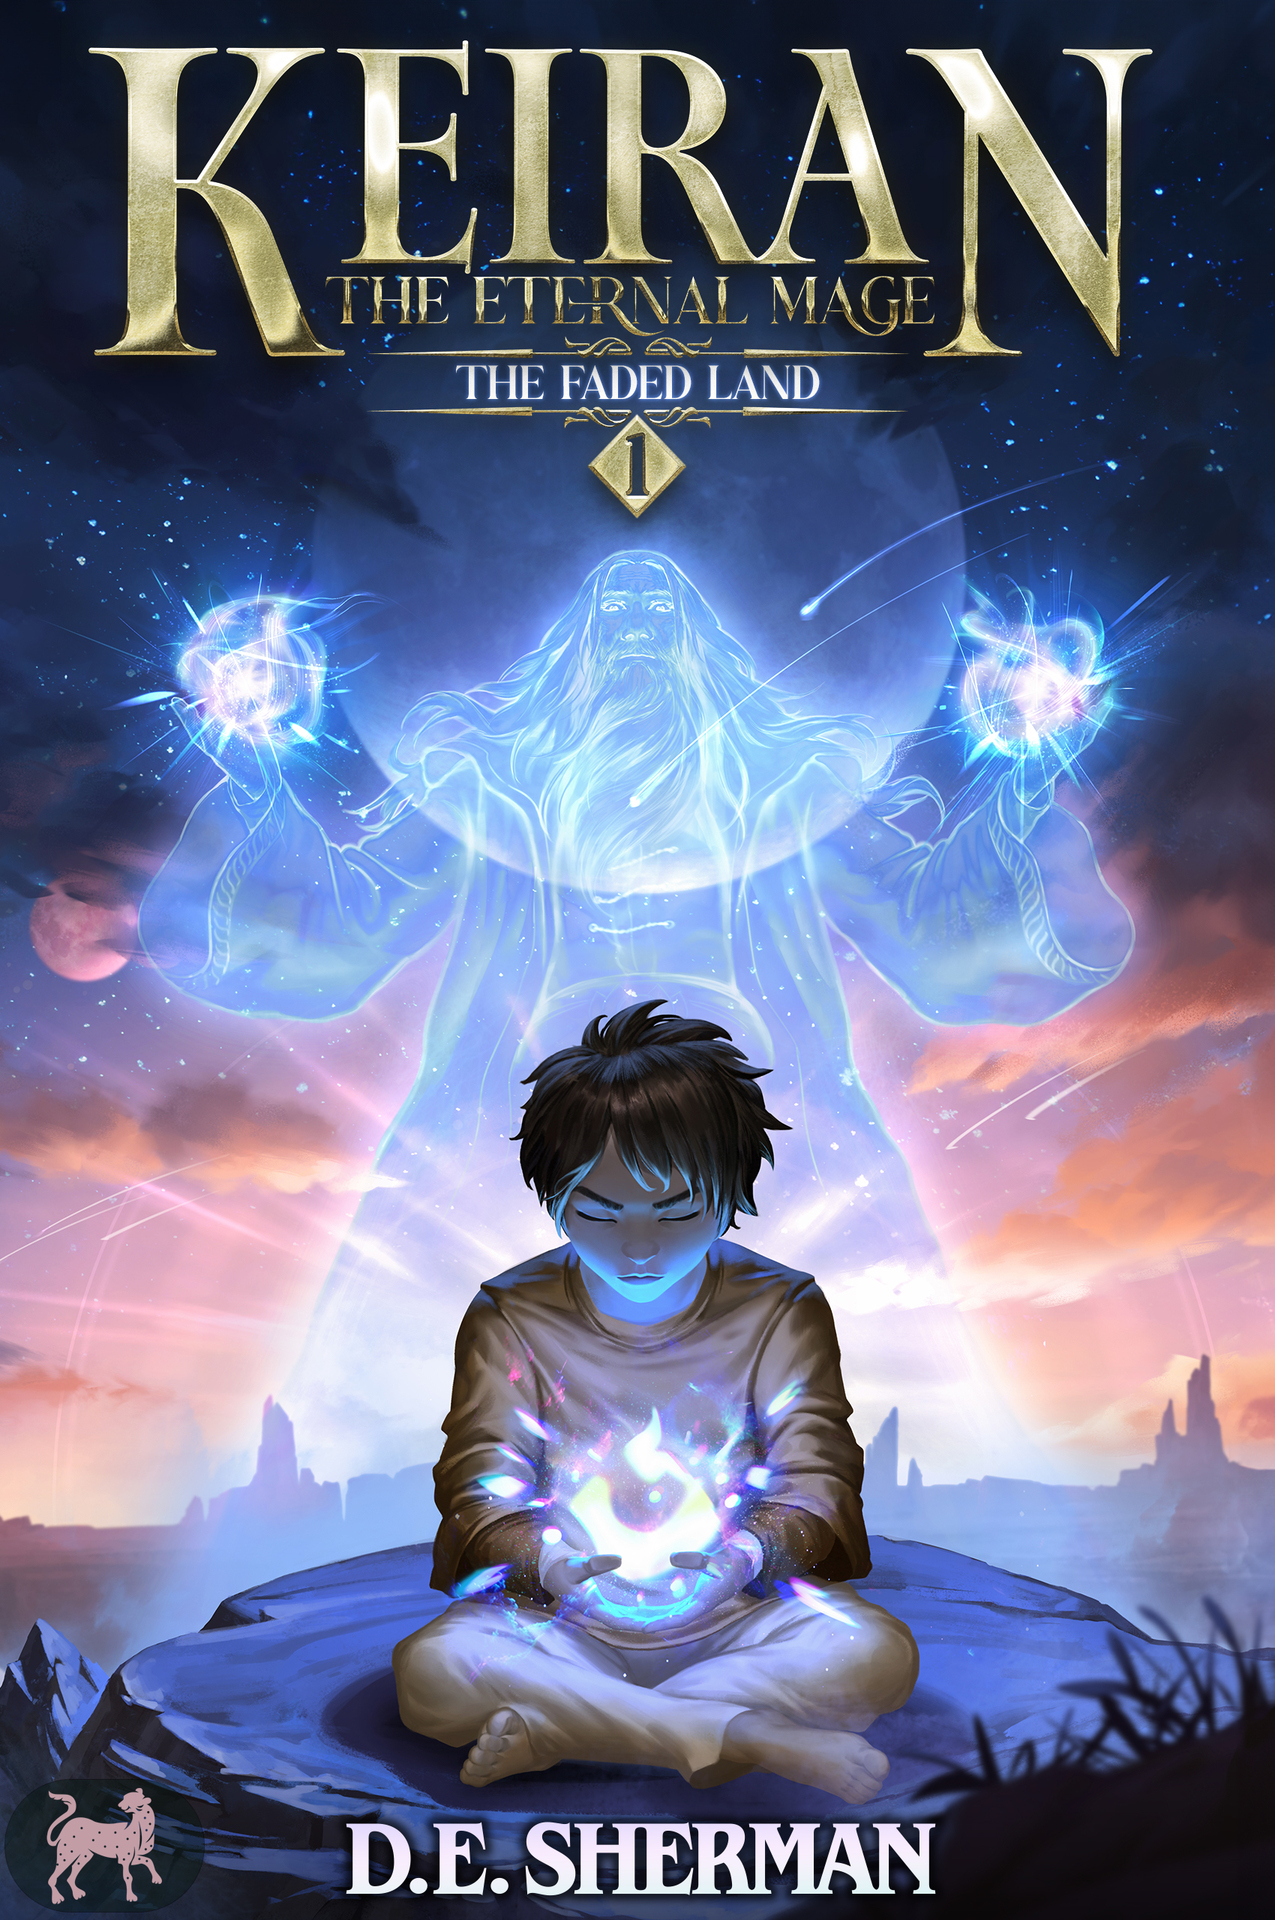 The Faded Land: A Progression Fantasy Epic (Keiran: The Eternal Mage Book 1)